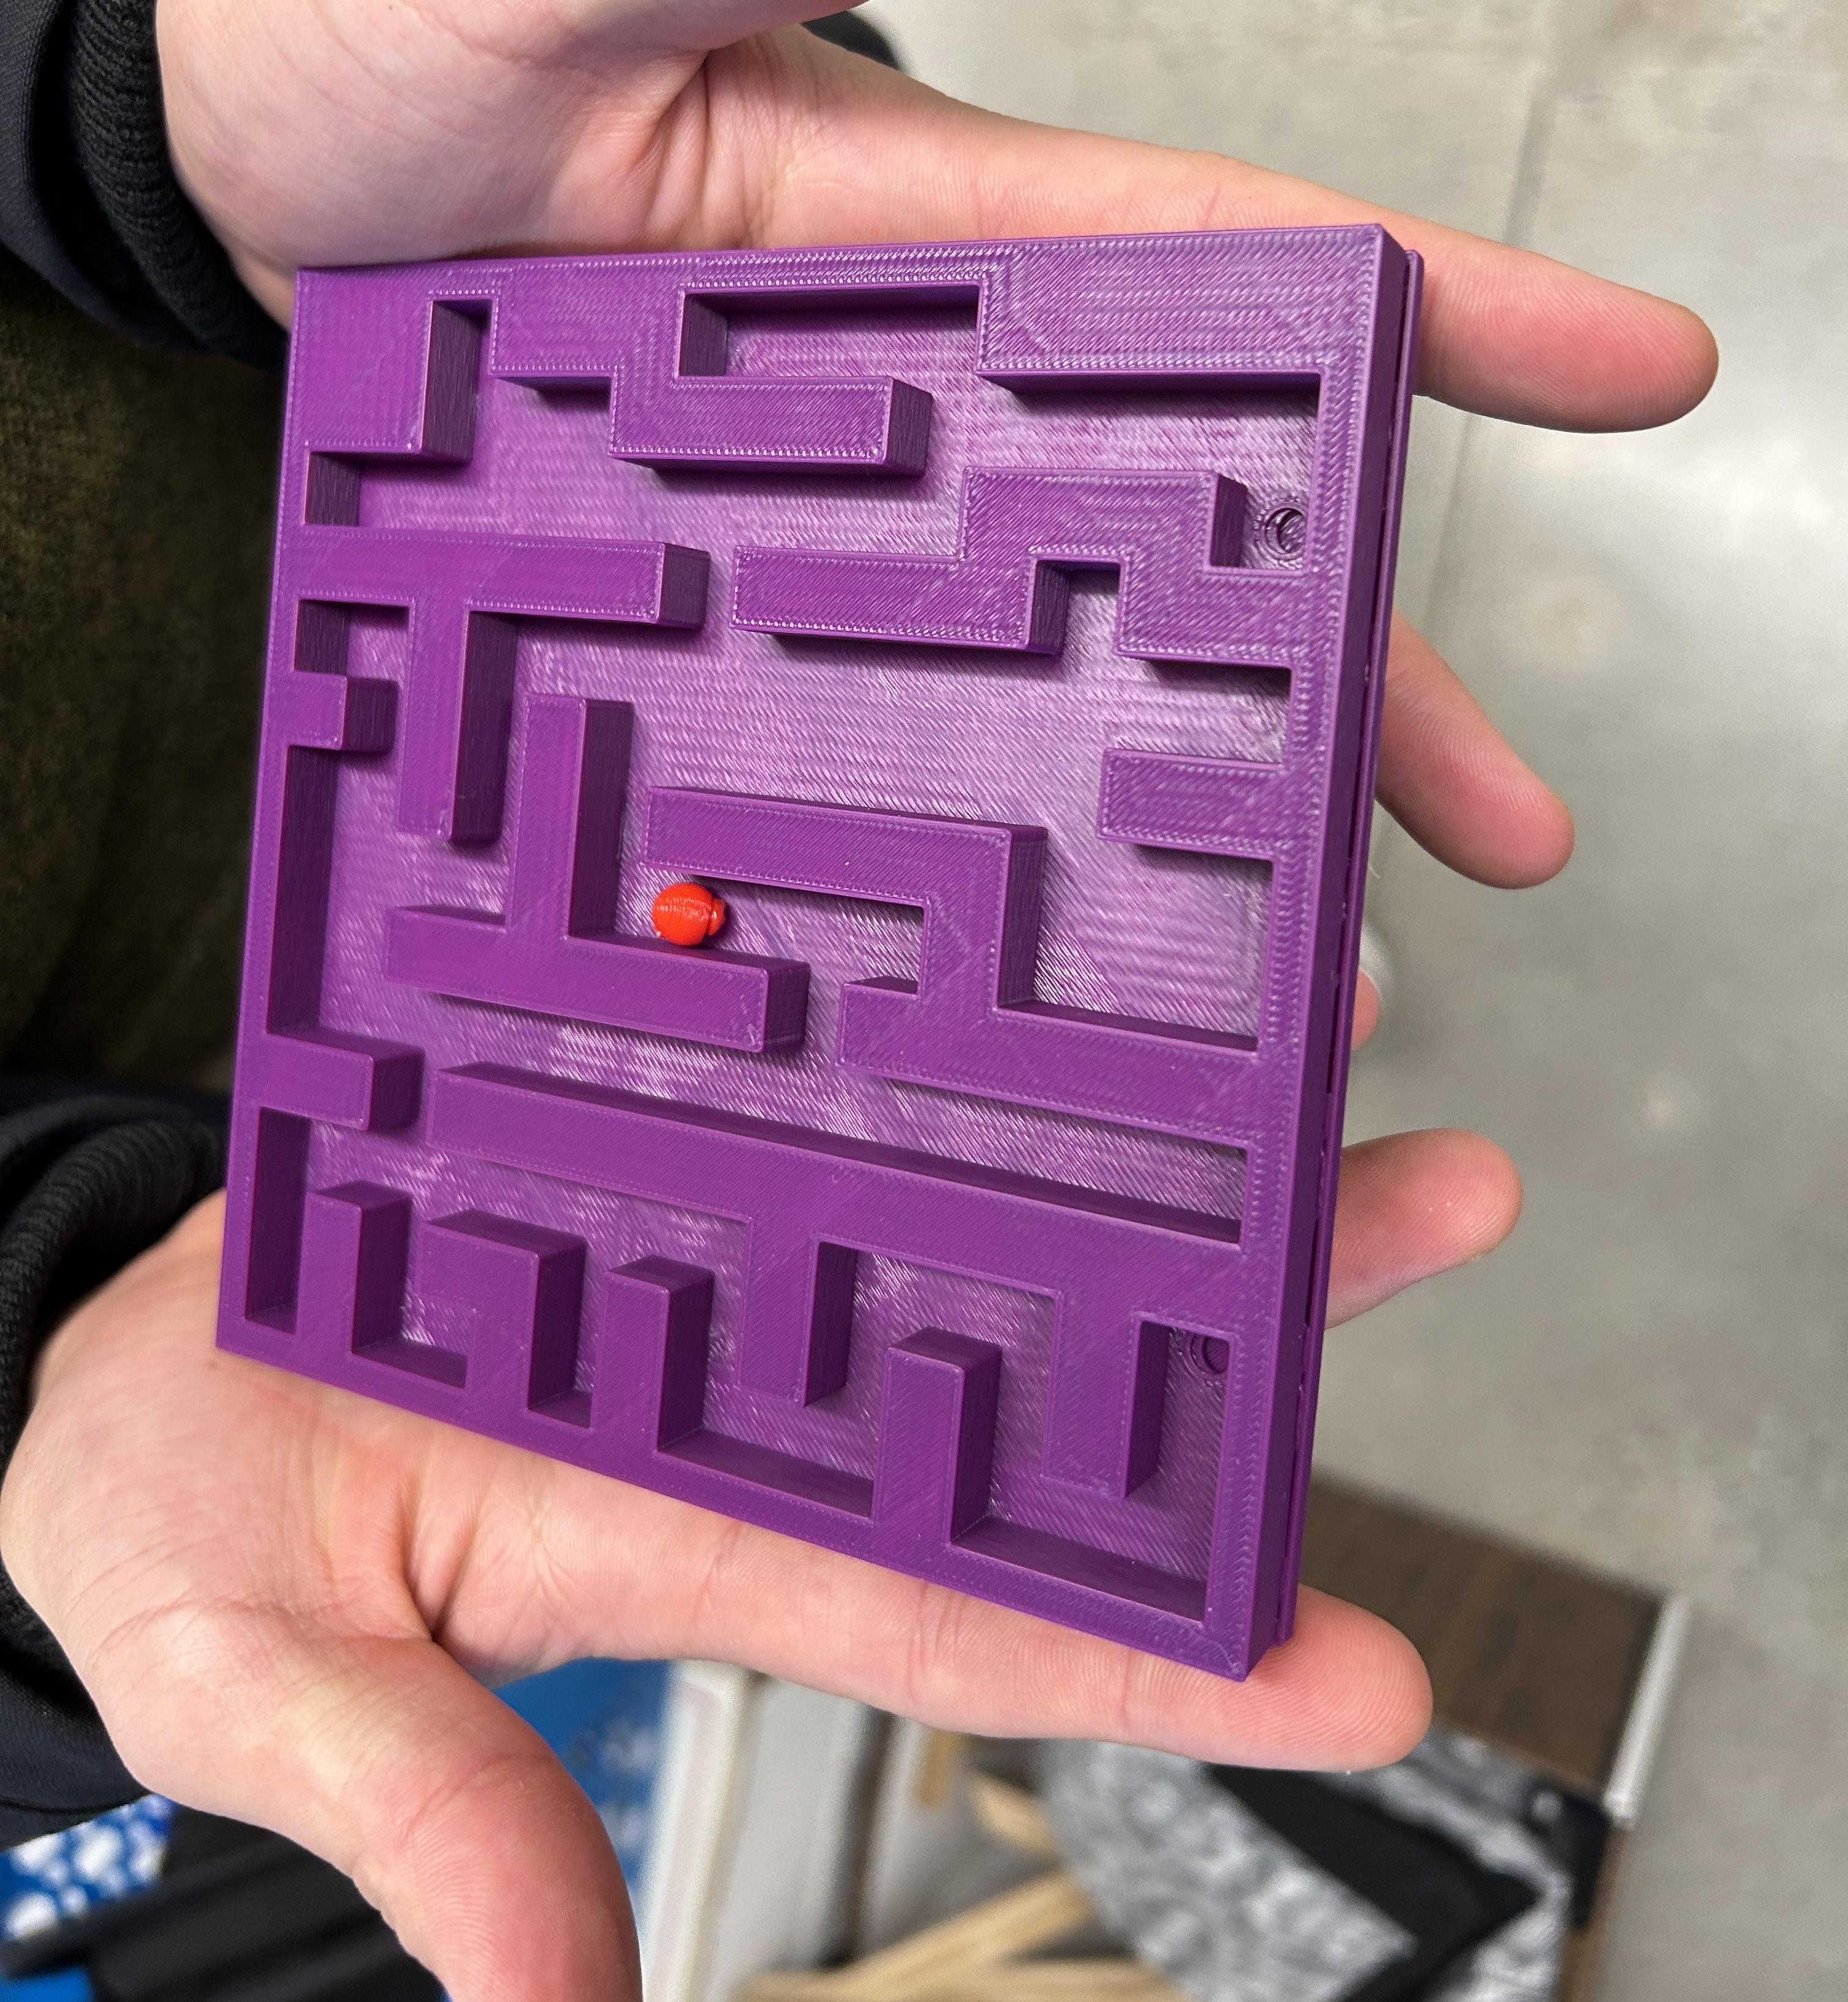 How to Design a Maze Puzzle